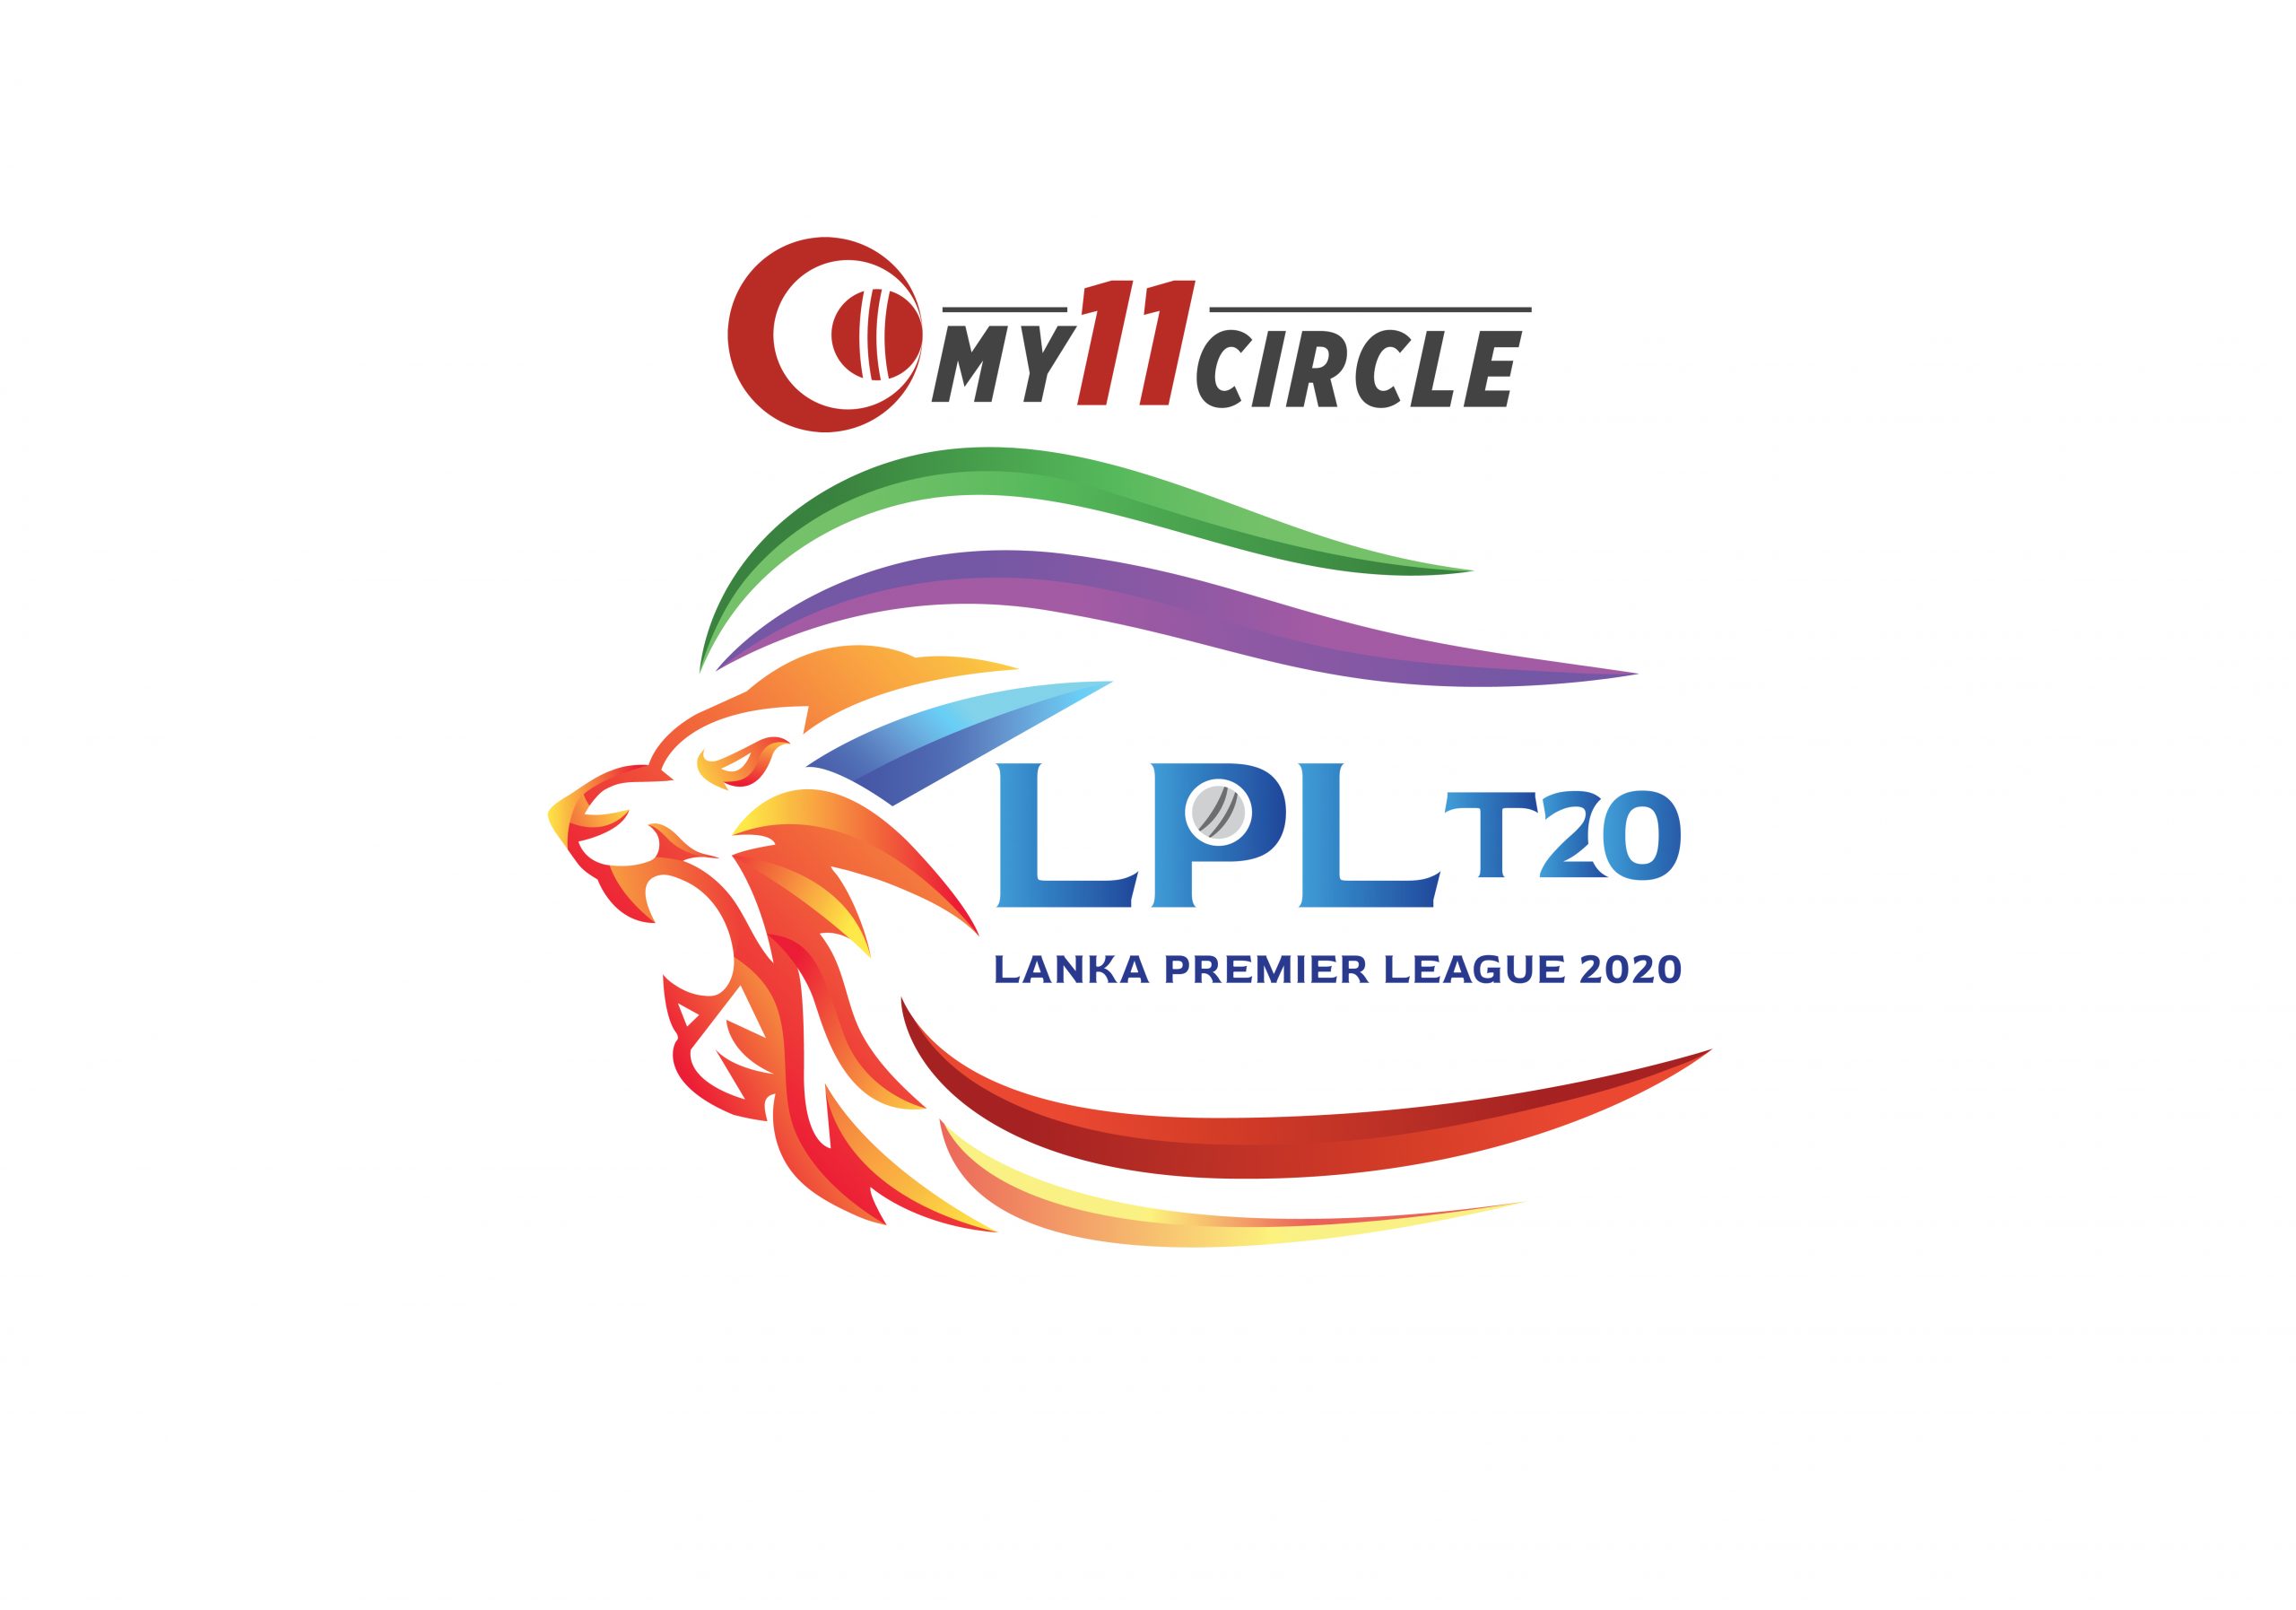 My11Circle comes on board as title sponsor of LPL